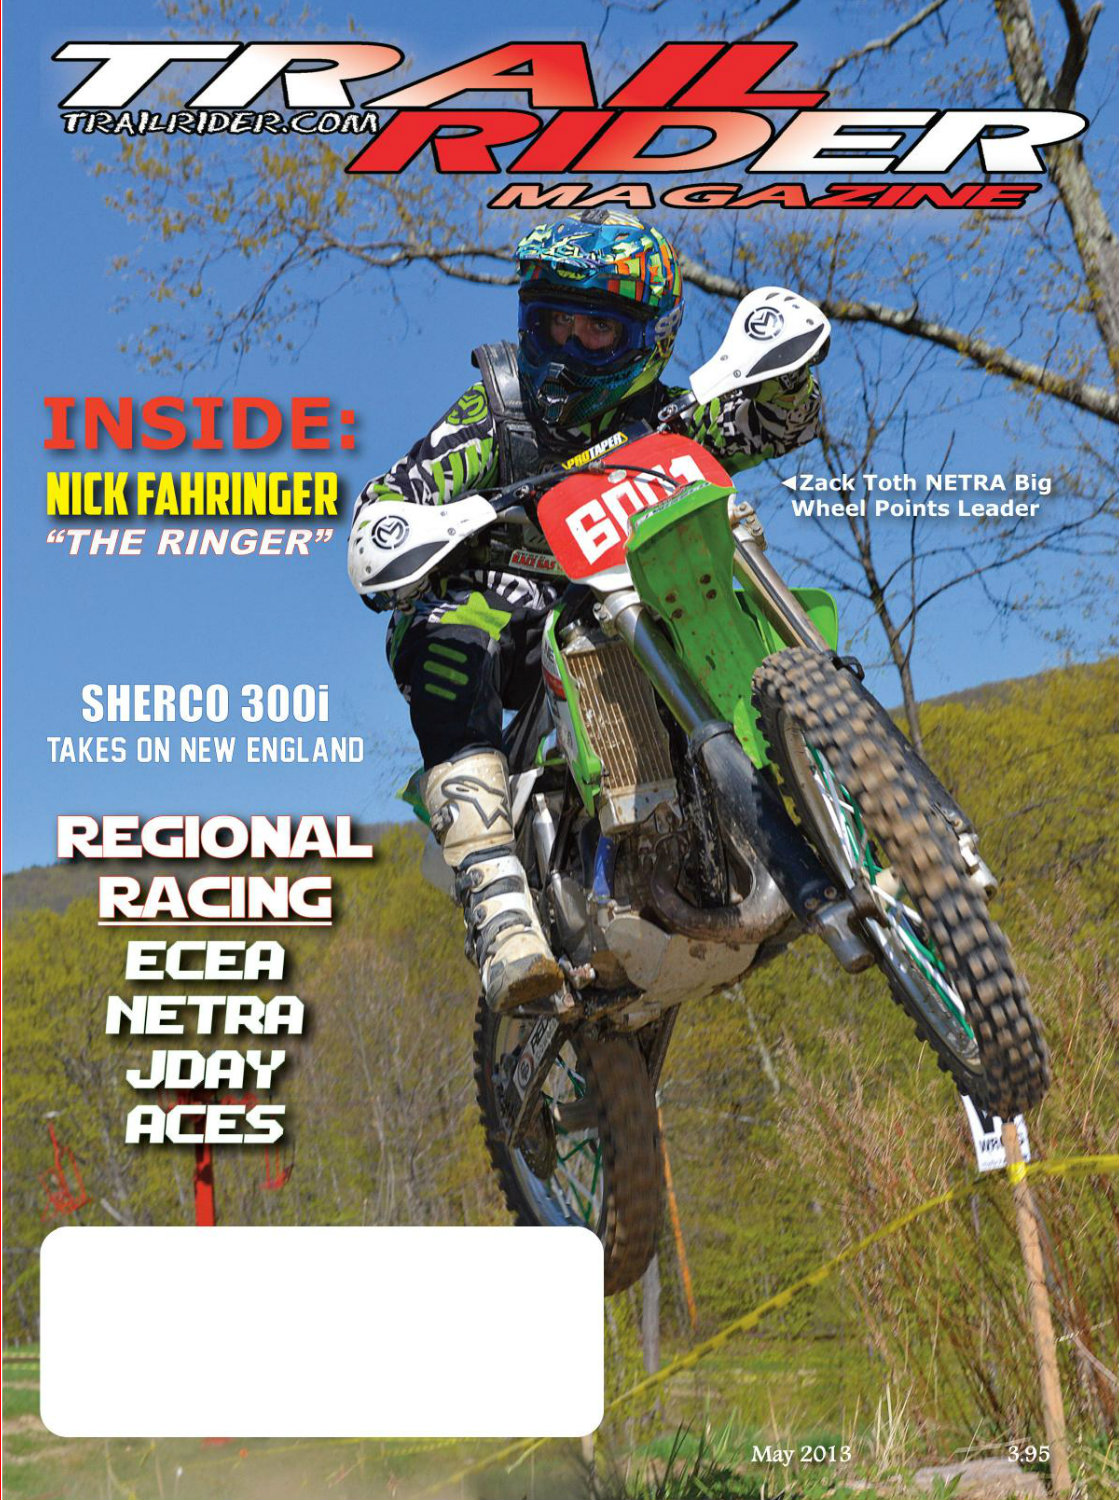 Zack Toth on the May 2013 Trail Rider cover